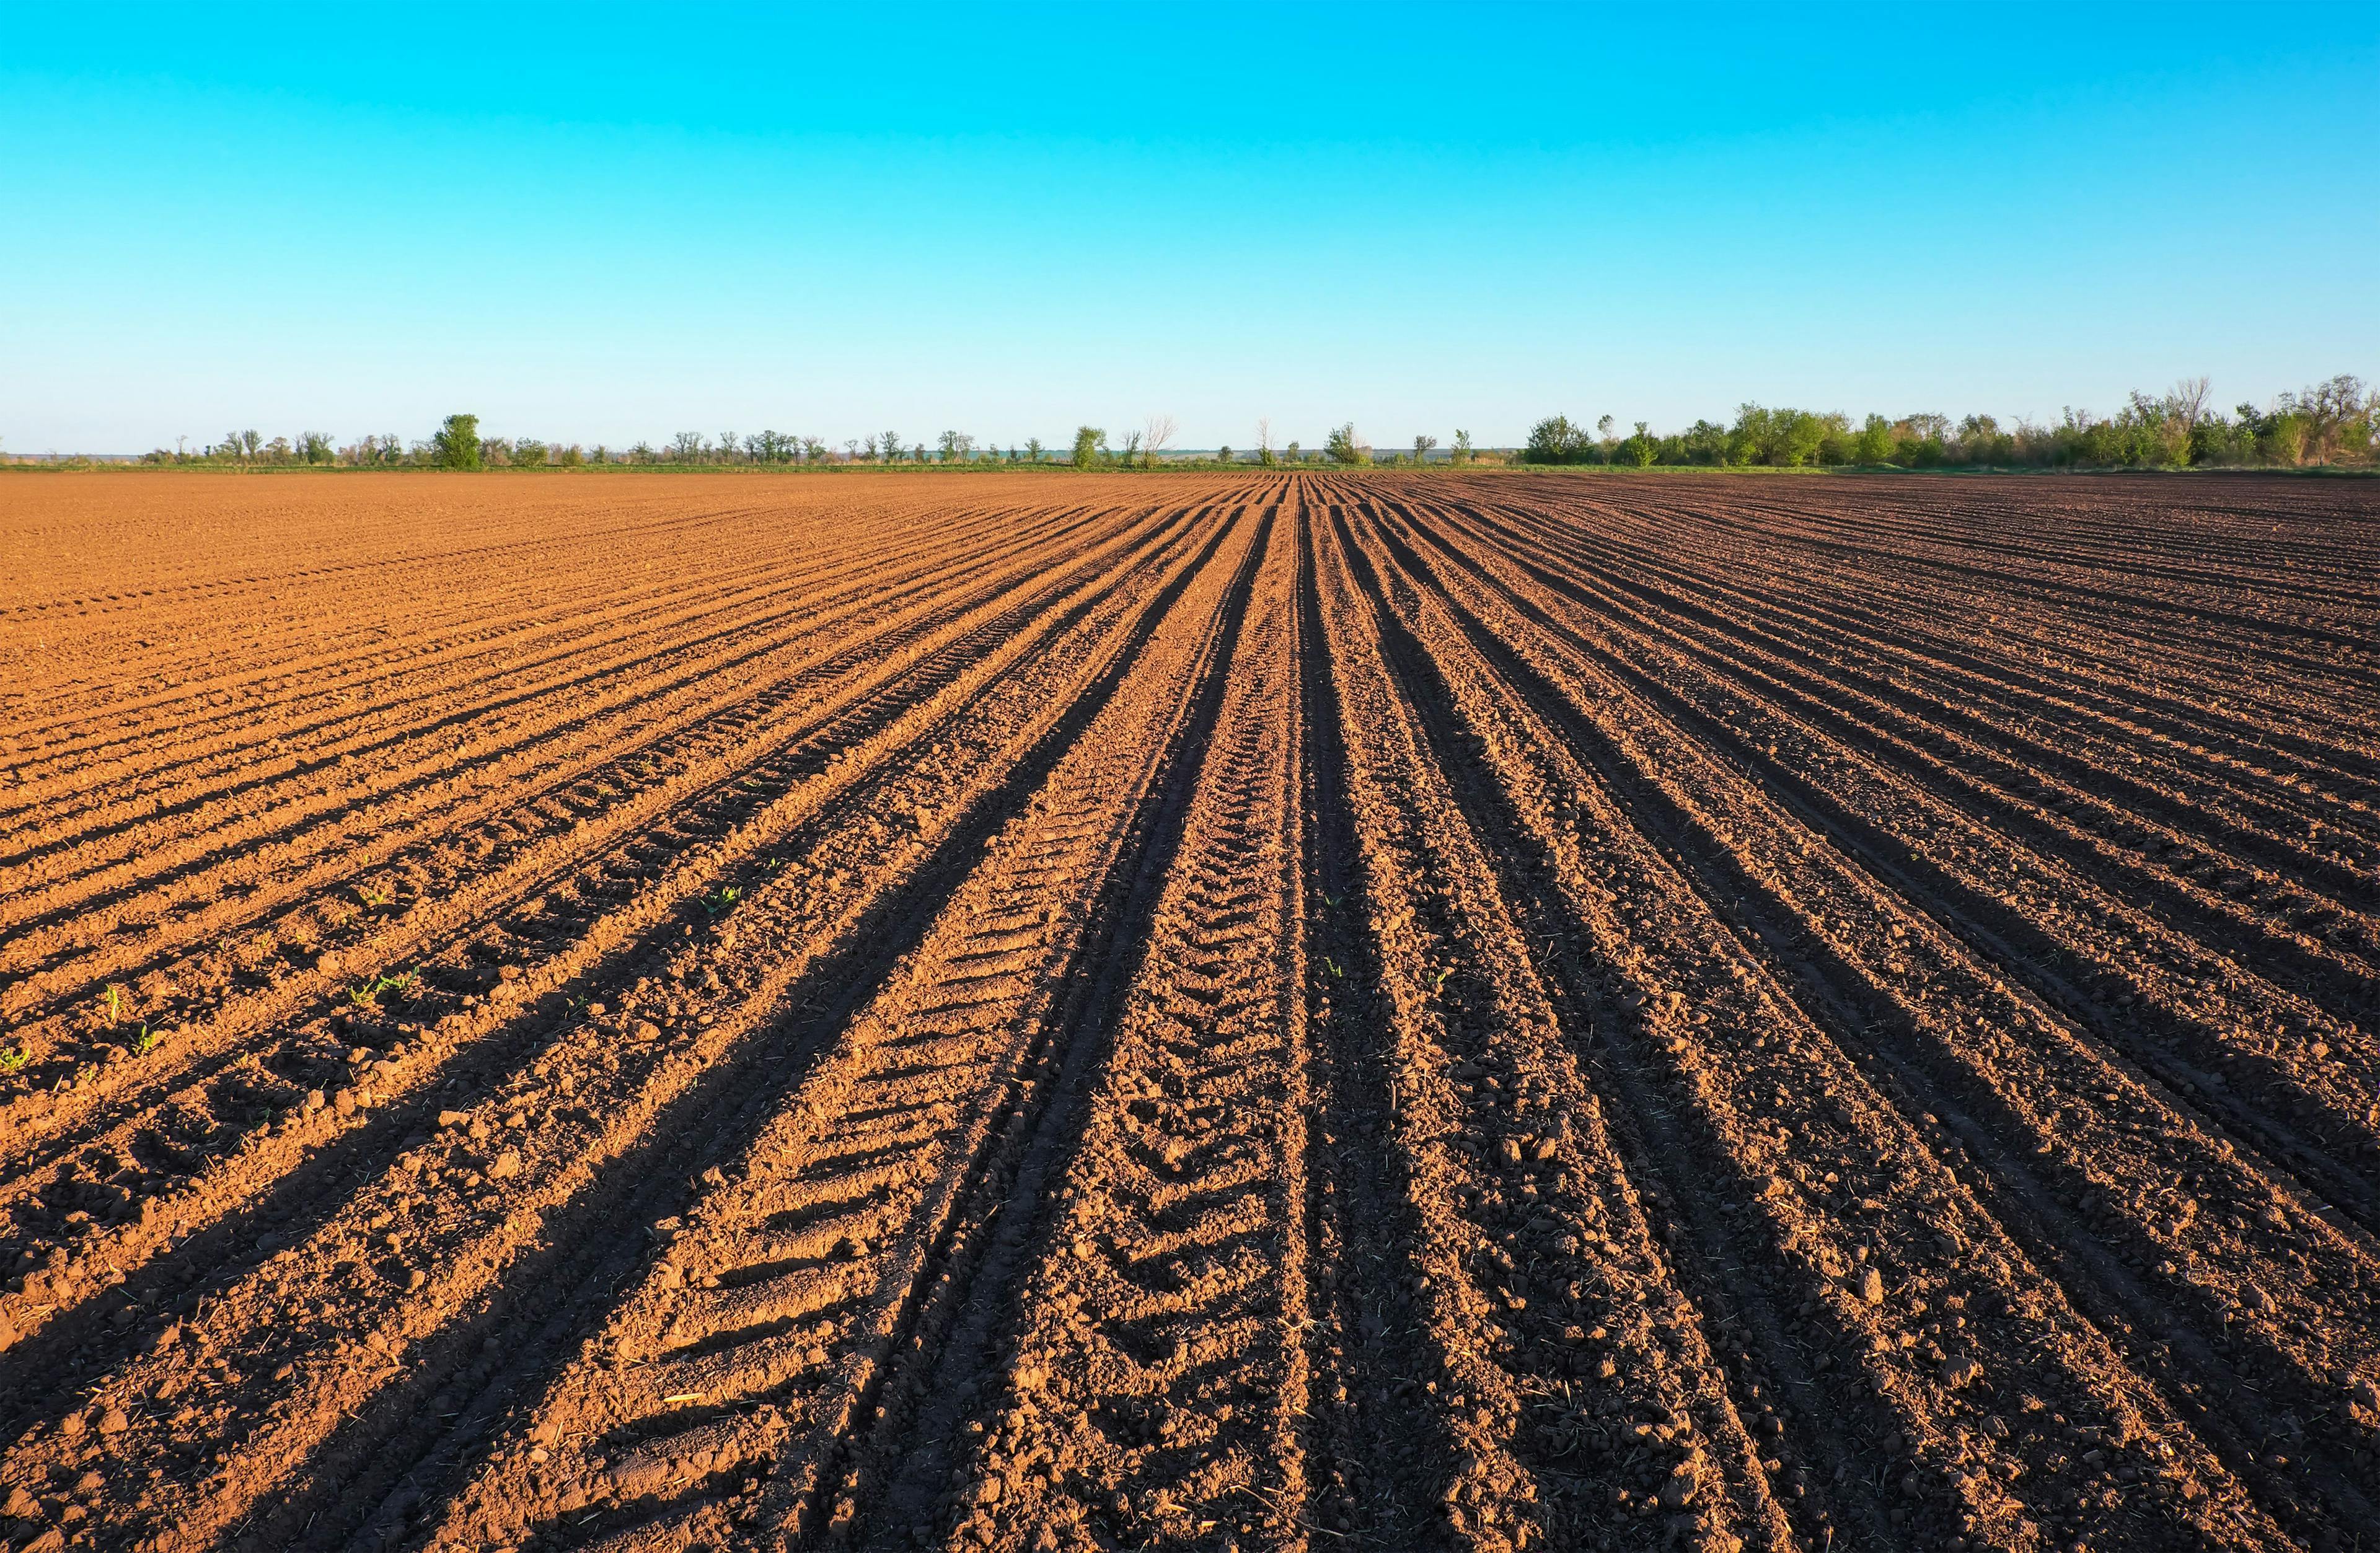 Preparing field for planting. Plowed soil in spring time with blue sky. | Image Credit: © es0lex - stock.adobe.com